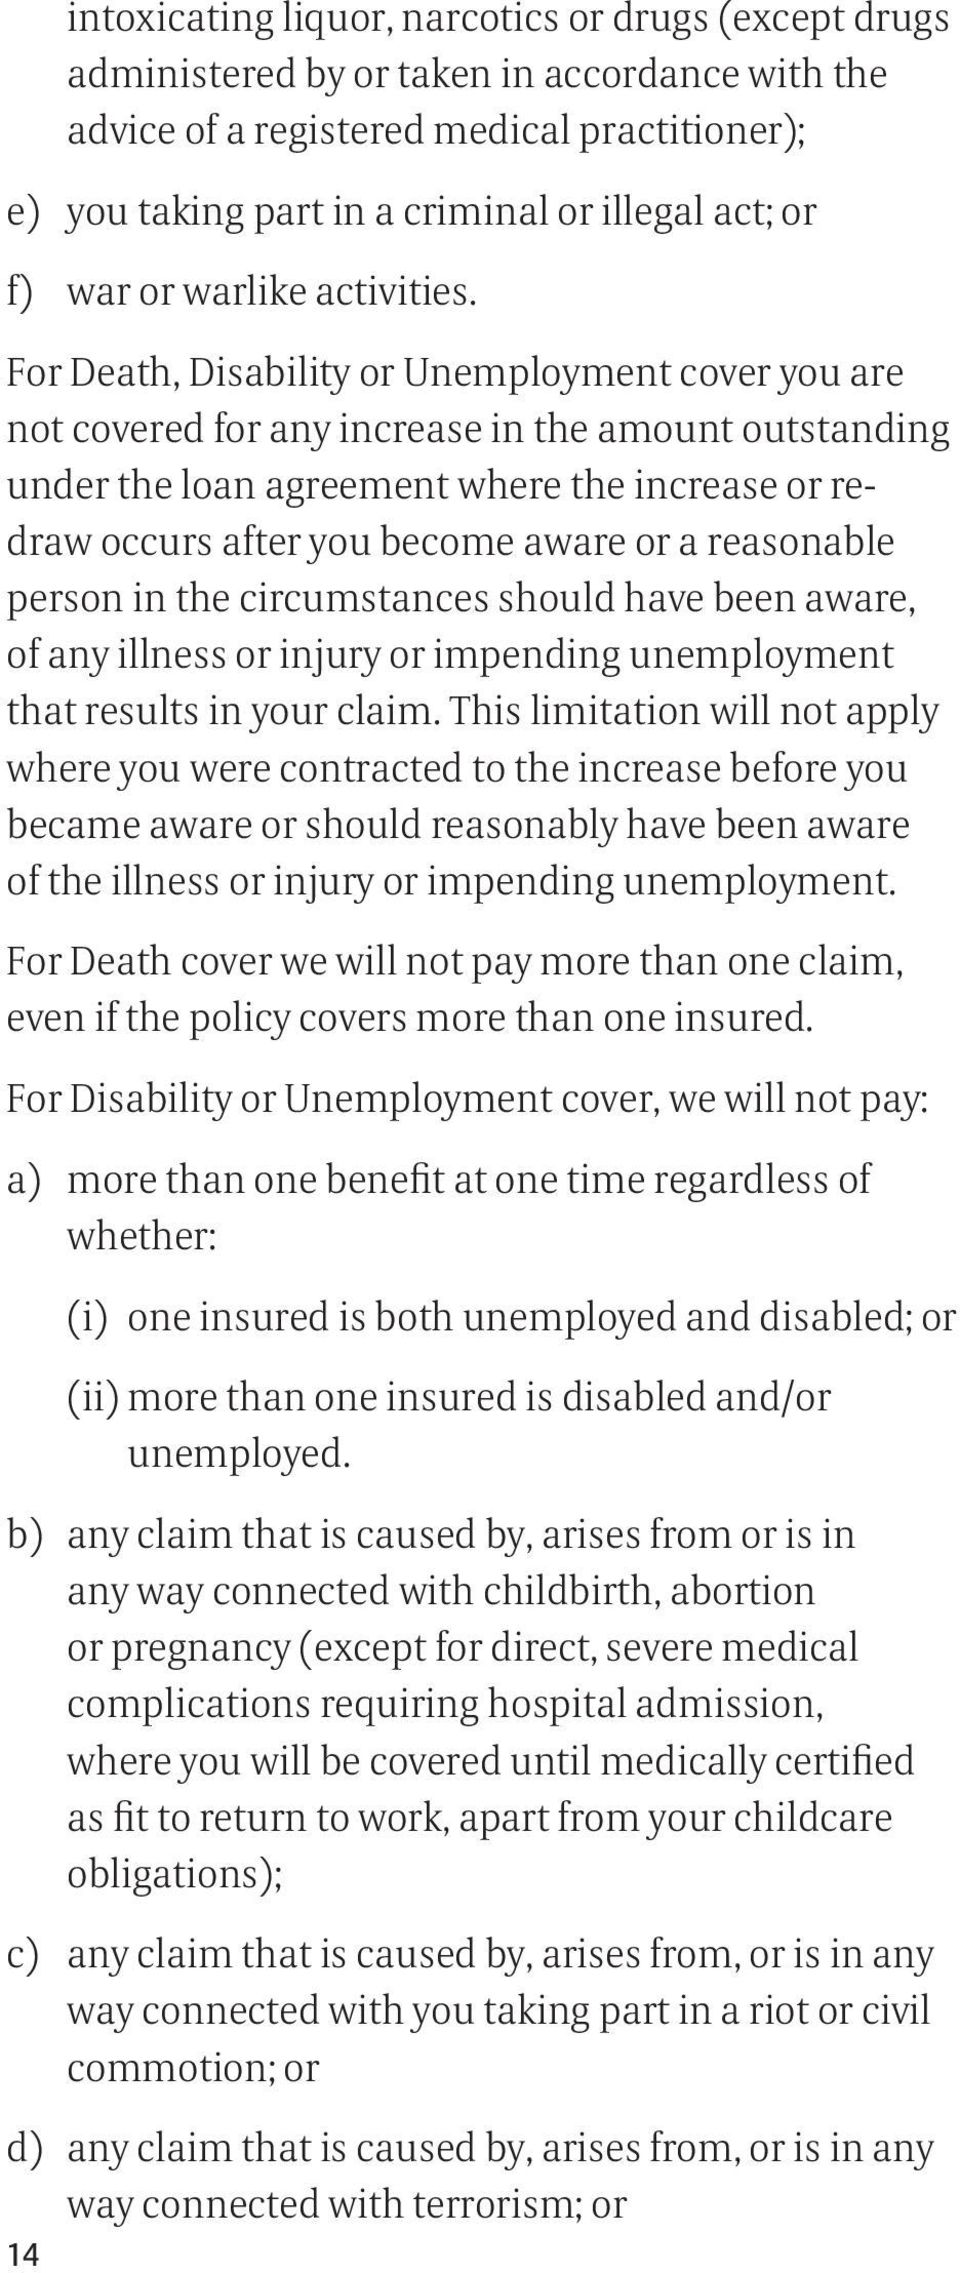 For Death, Disability or Unemployment cover you are not covered for any increase in the amount outstanding under the loan agreement where the increase or redraw occurs after you become aware or a